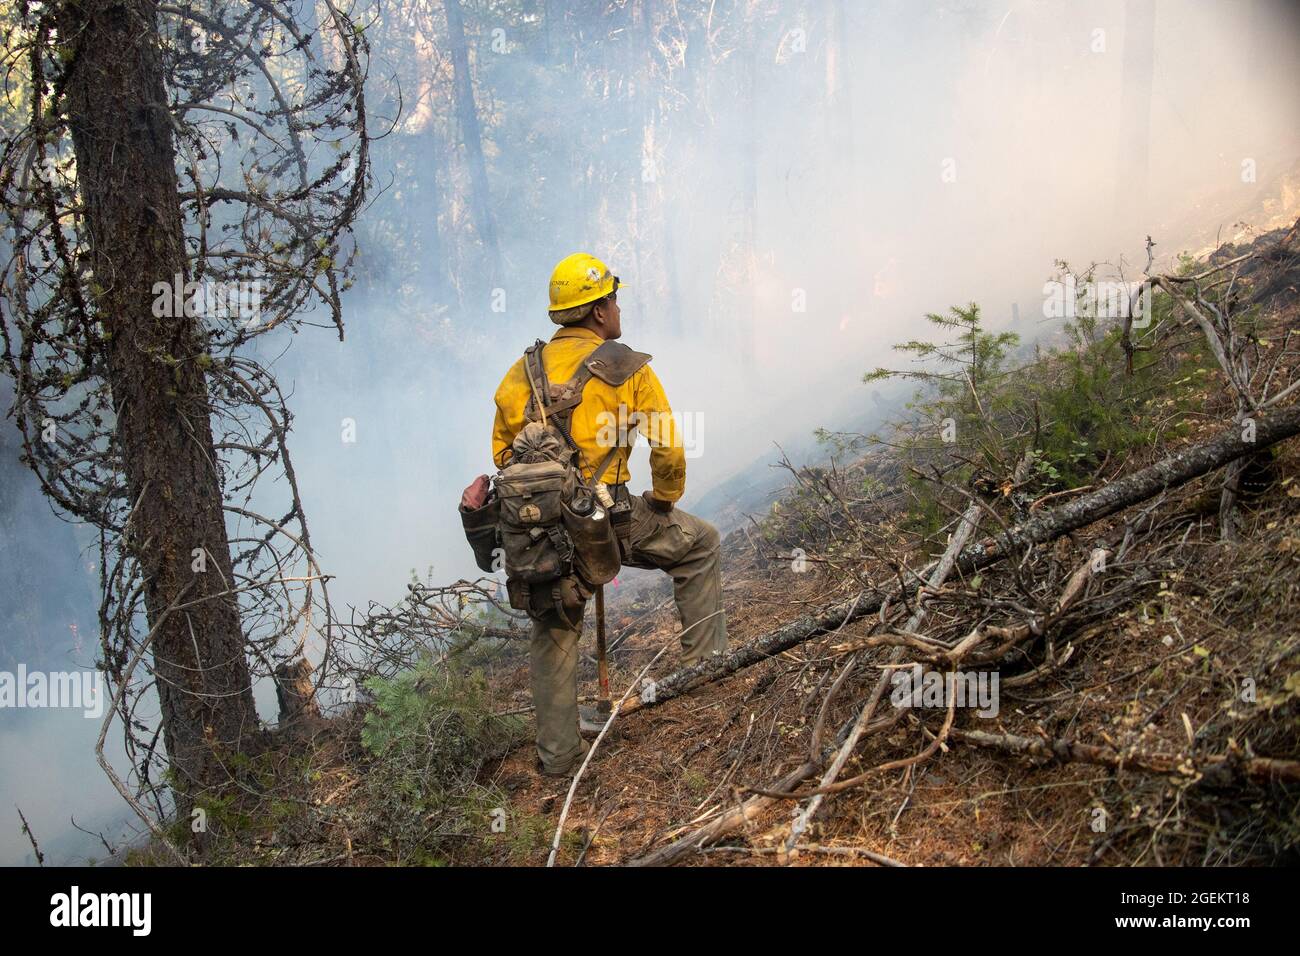 Greenville, USA. 20th Aug, 2021. A firefighter works in an area hit by the Dixie Fire near Greenville town in Northern California, the United States, on Aug. 19, 2021. The Dixie Fire has burned more than 700,000 acres as of Friday afternoon in remote Northern California. Credit: Dong Xudong/Xinhua/Alamy Live News Stock Photo